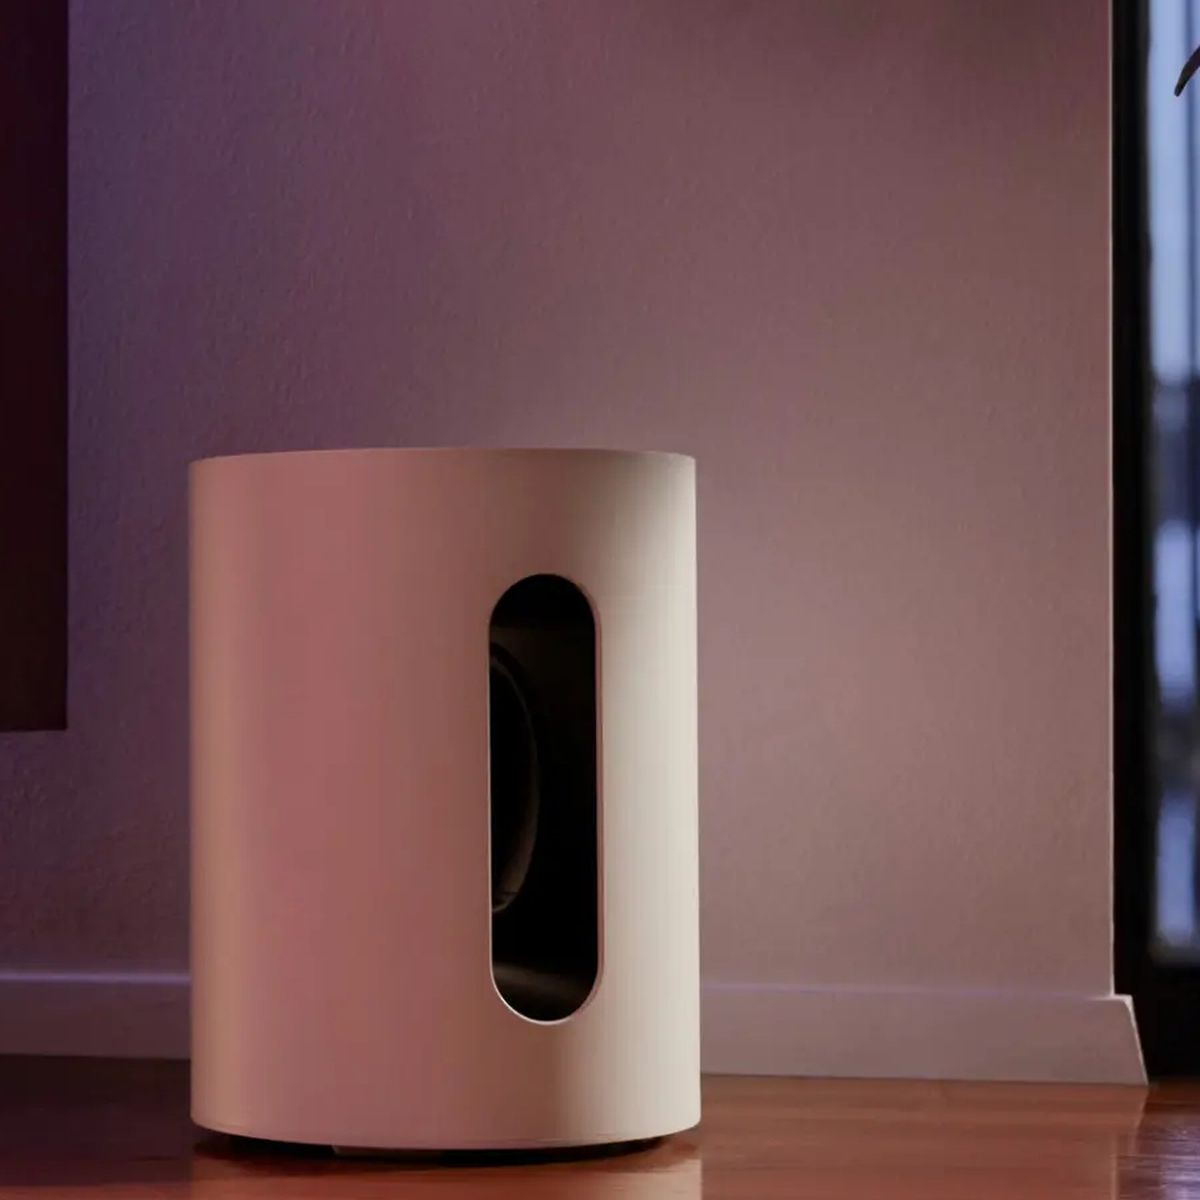 Sonos Announces Sub Mini, Can Be Paired With AirPlay-Enabled 